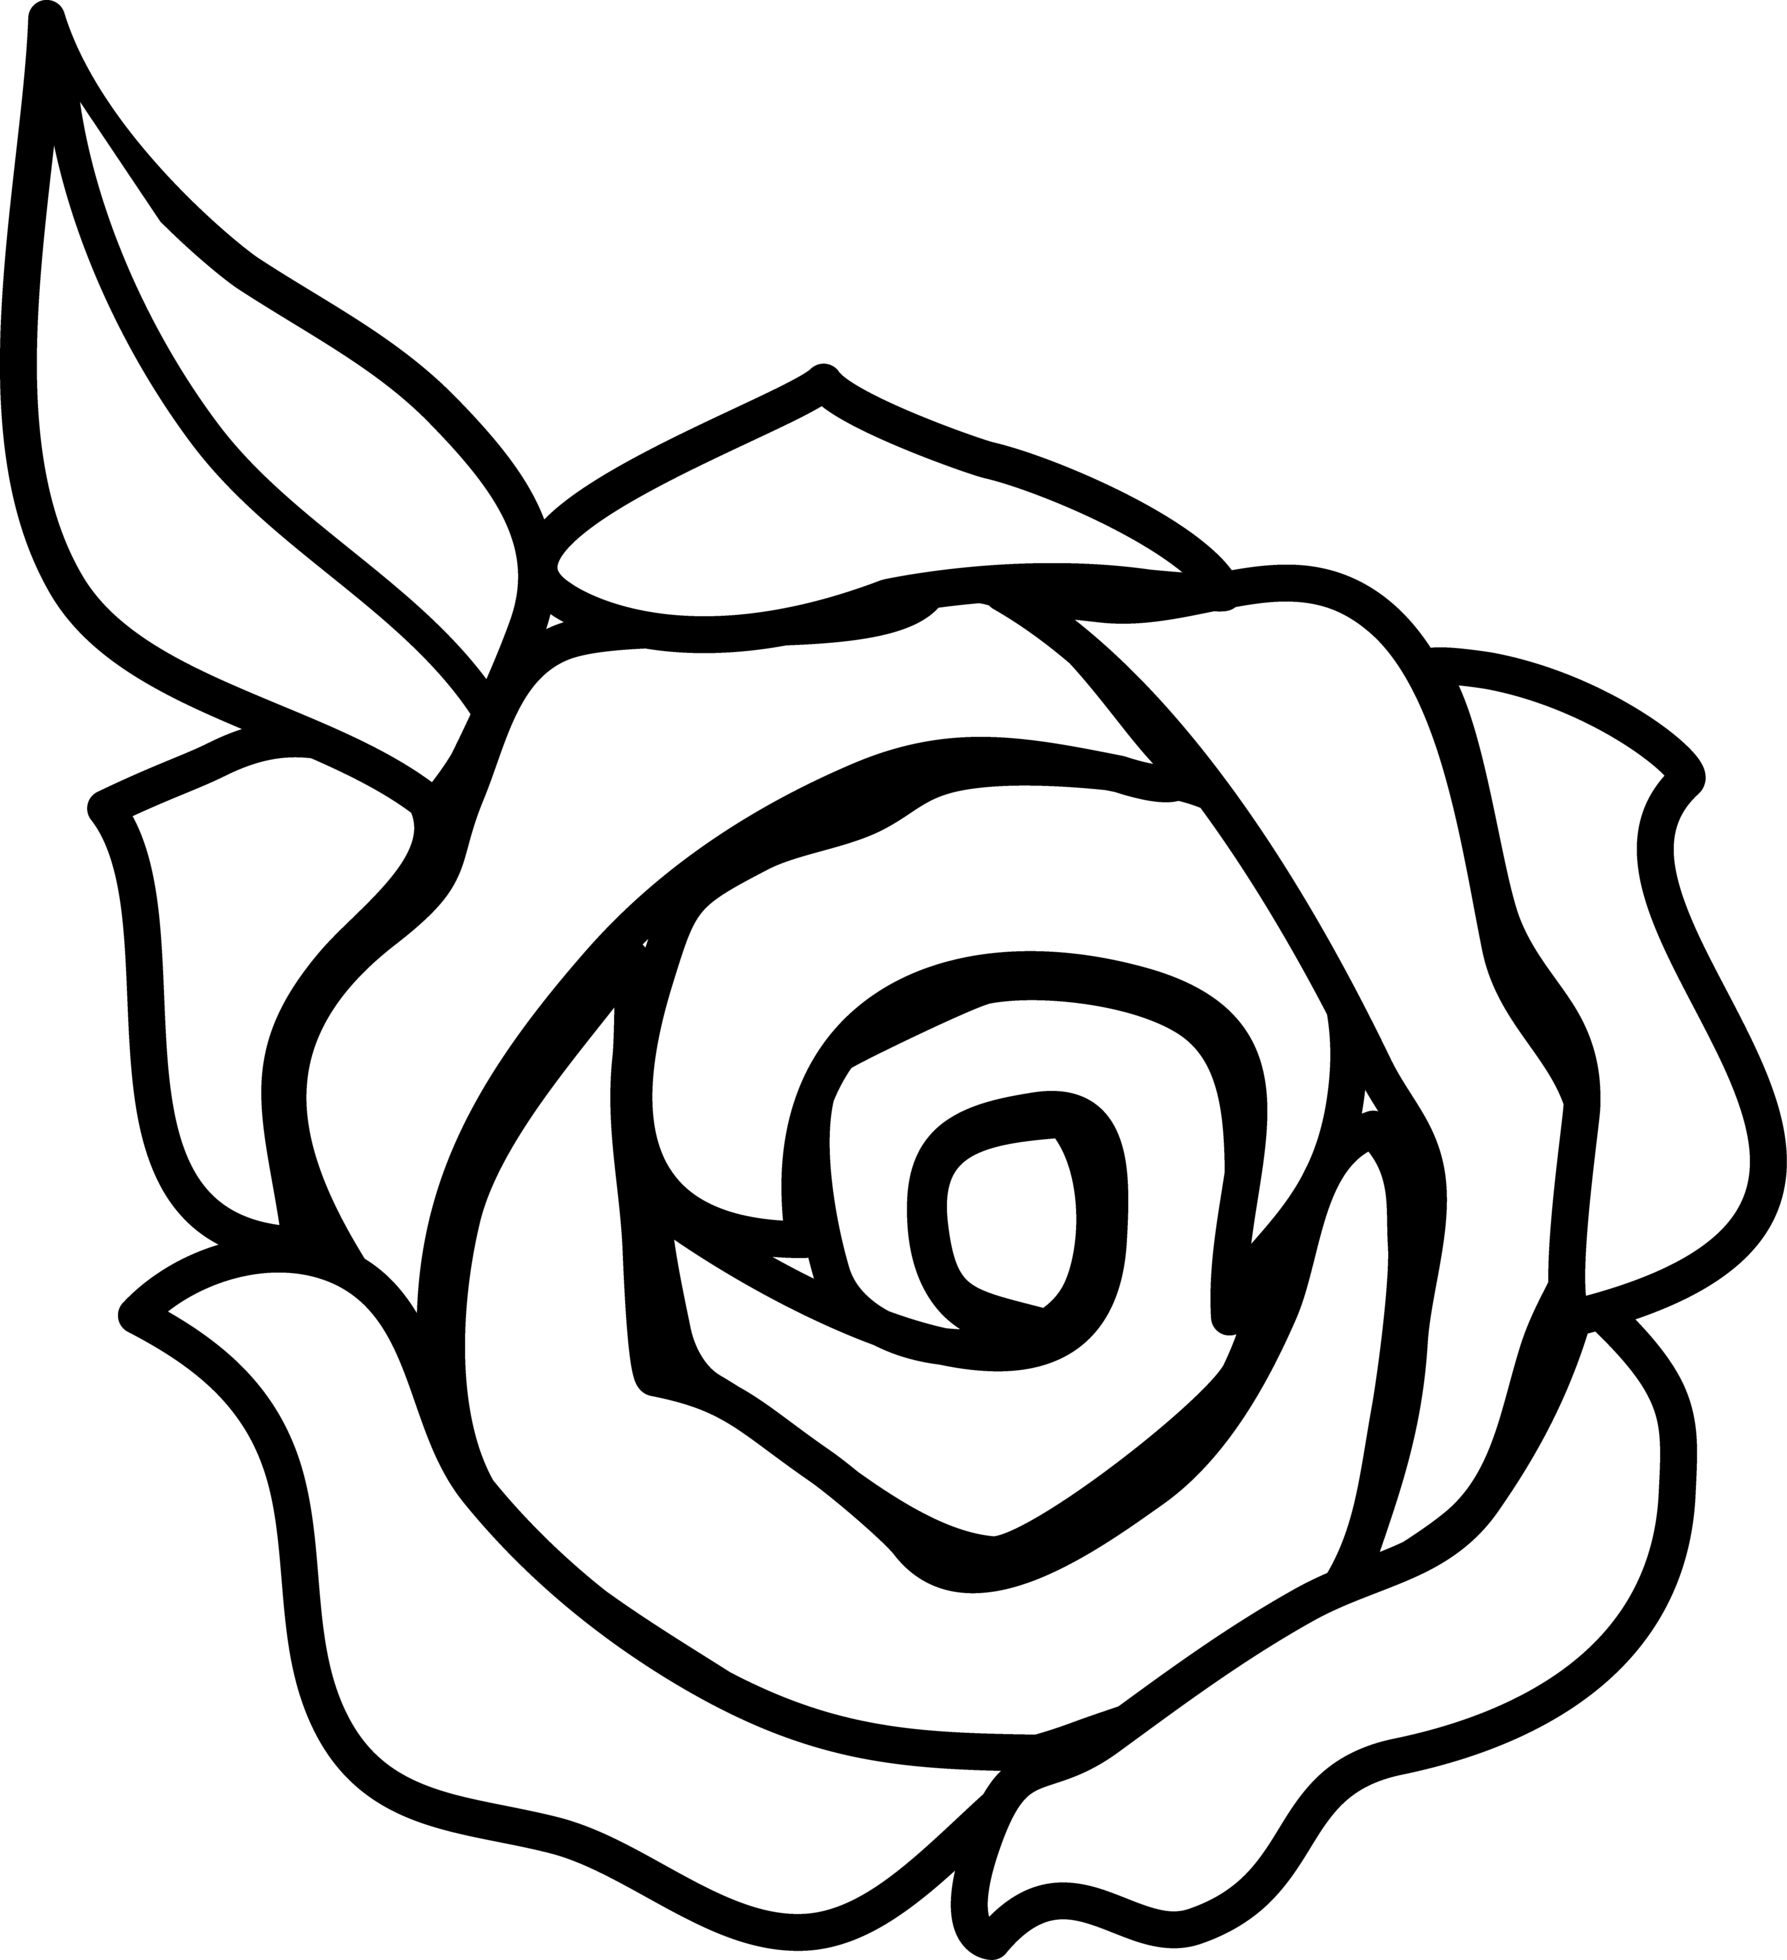 How to draw a rose step-by-step guide for beginners - Craft-Mart